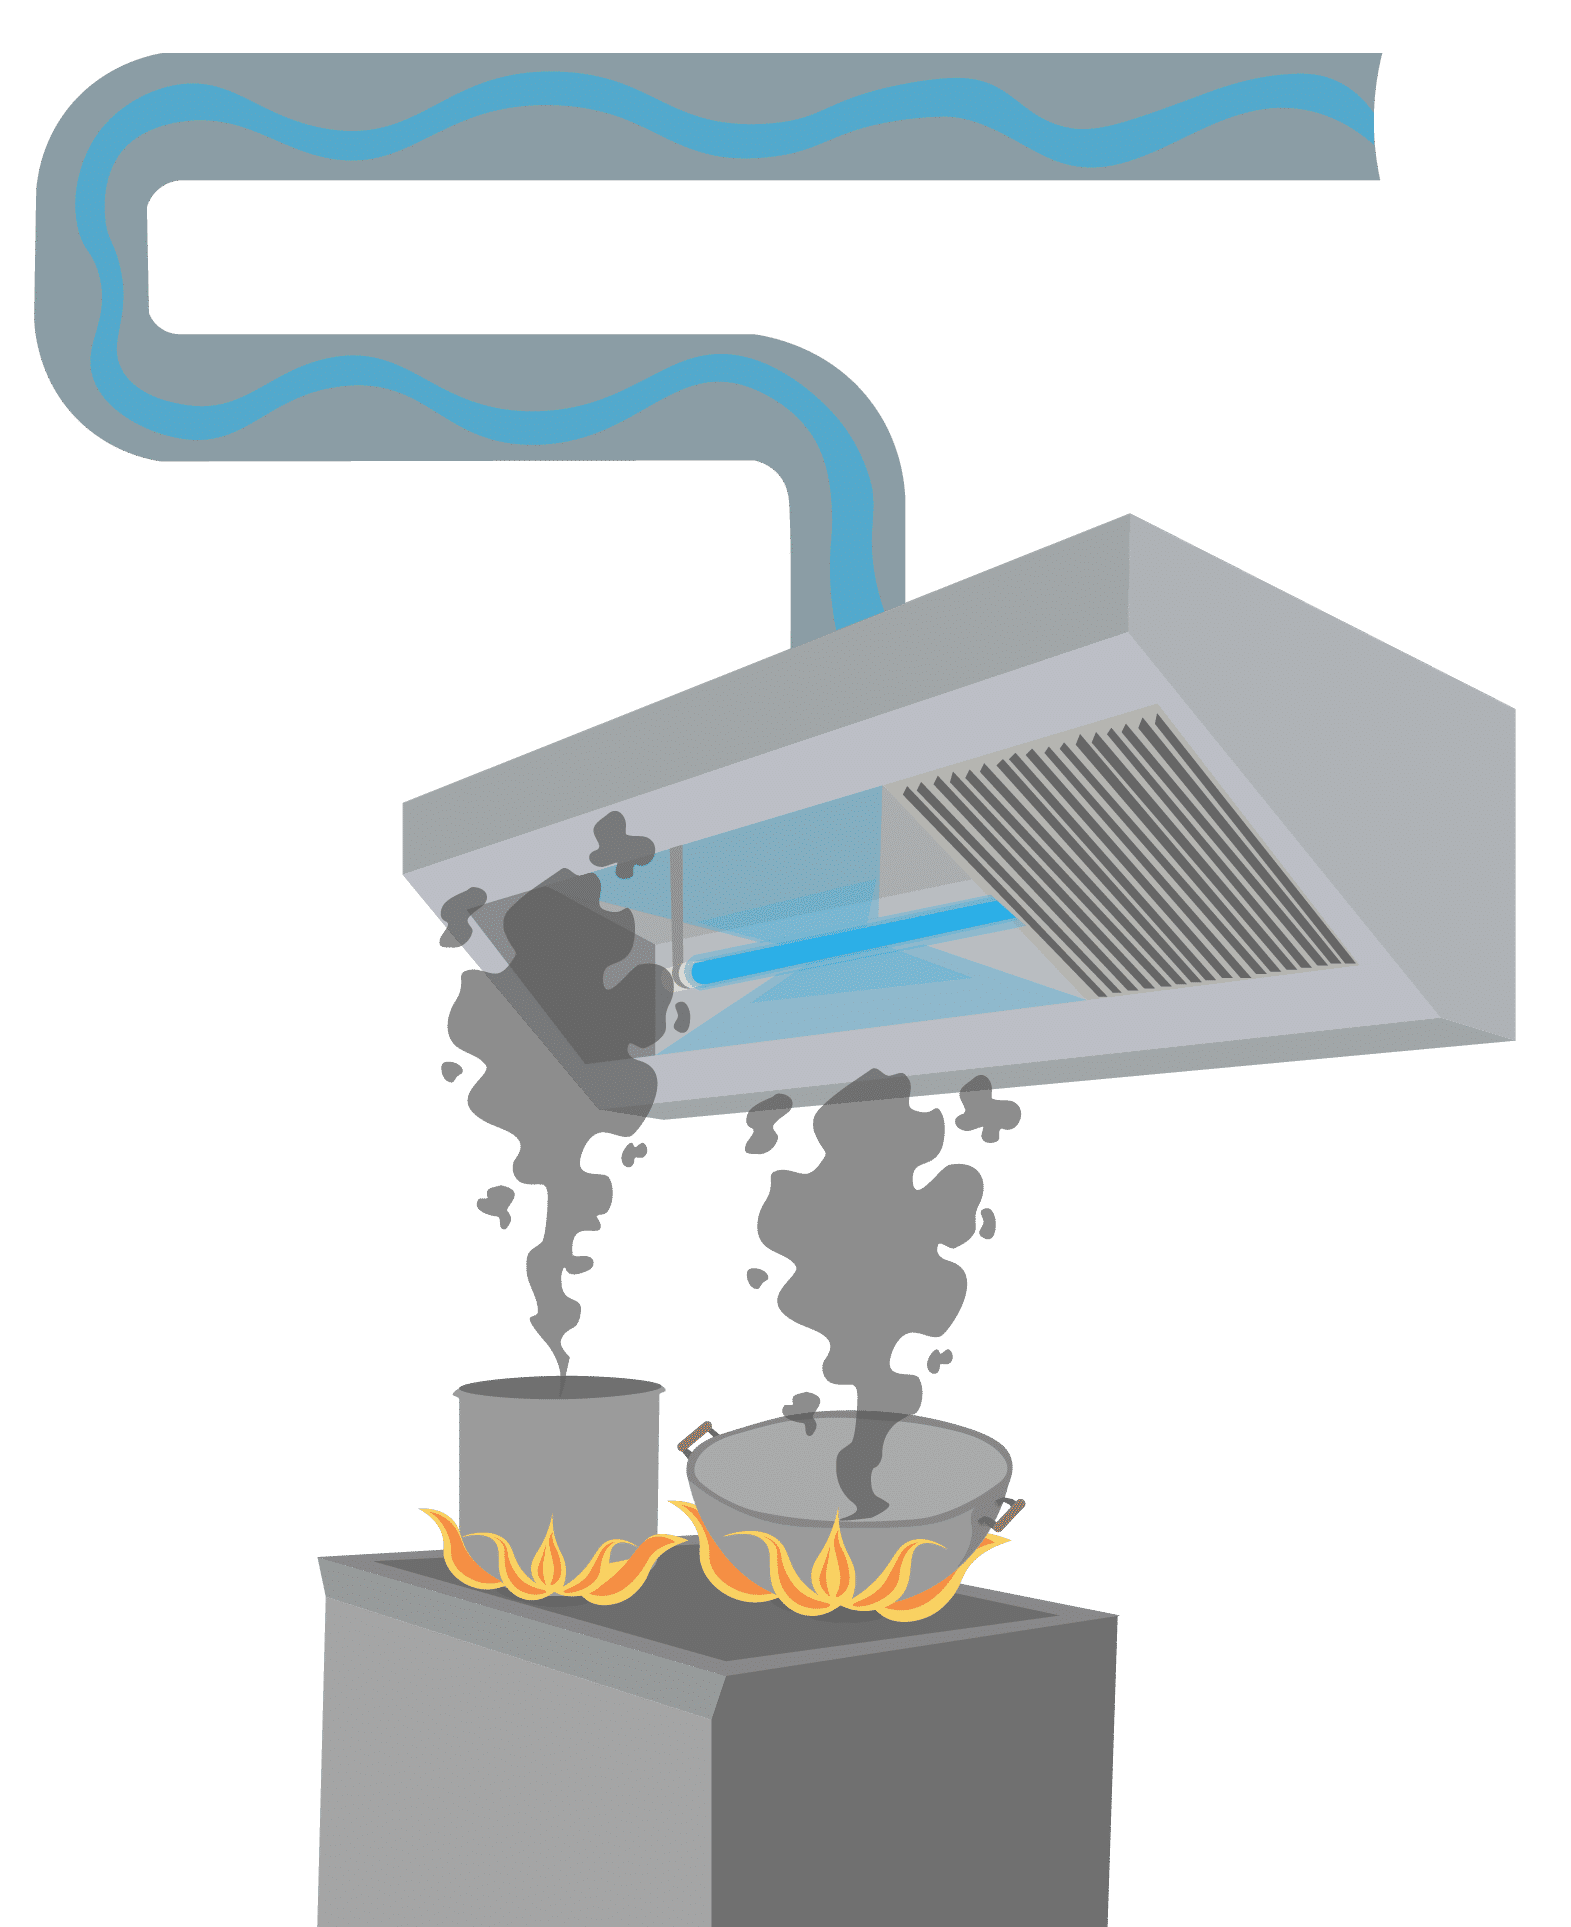 Illustration of OGR working to clean the kitchen hood and the attached ventilation